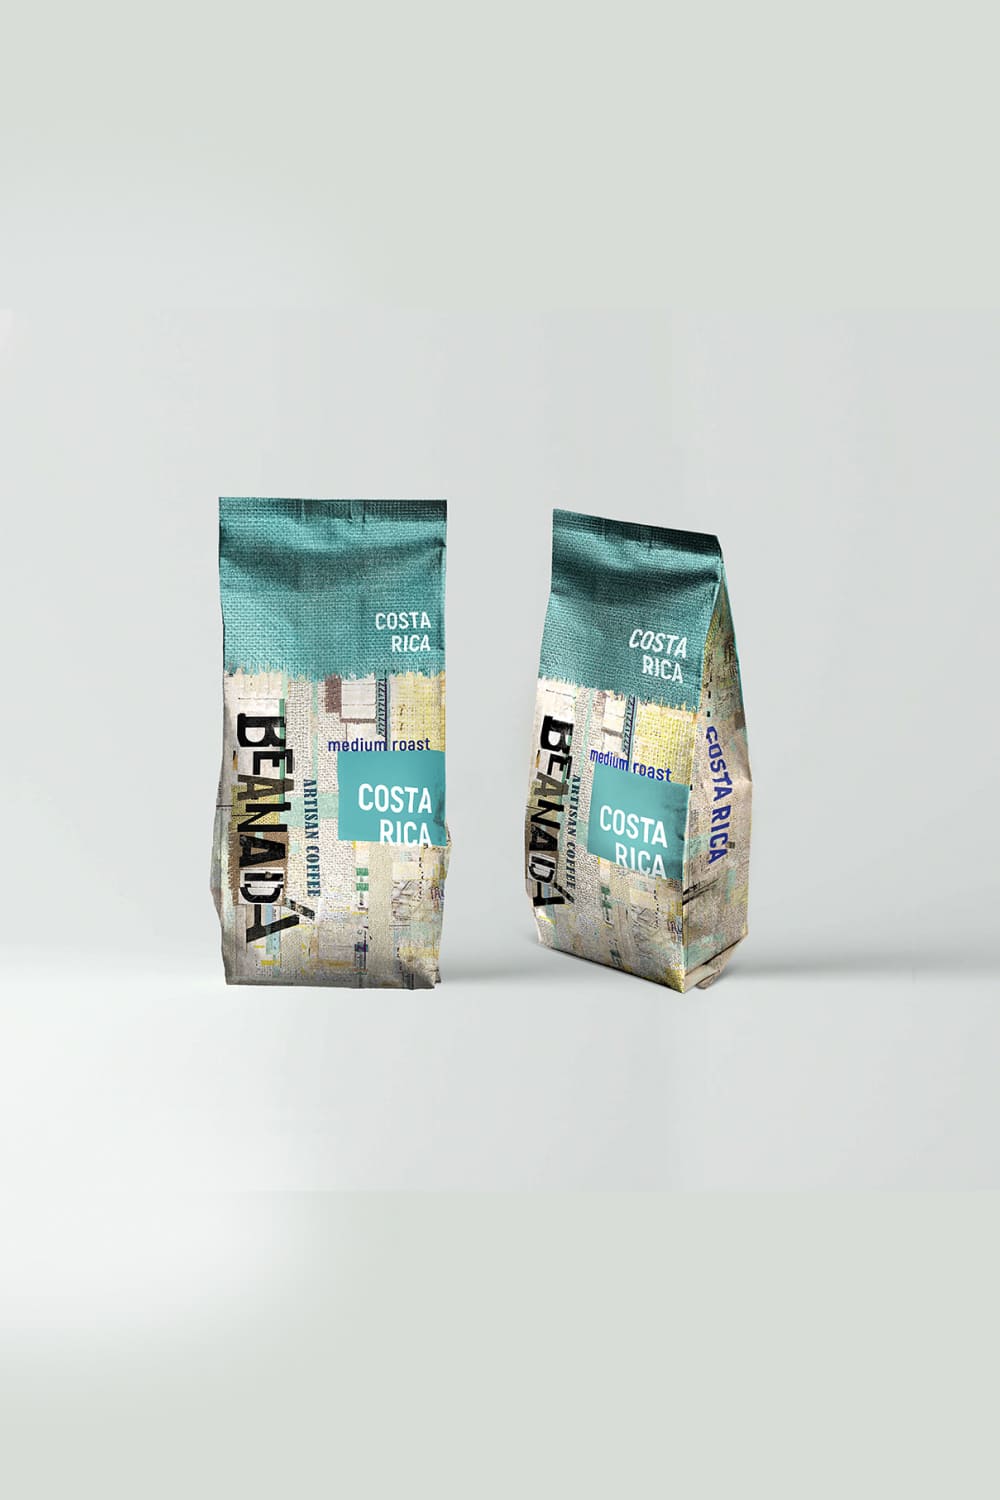 Stylish and modern coffee packaging catches the eye.